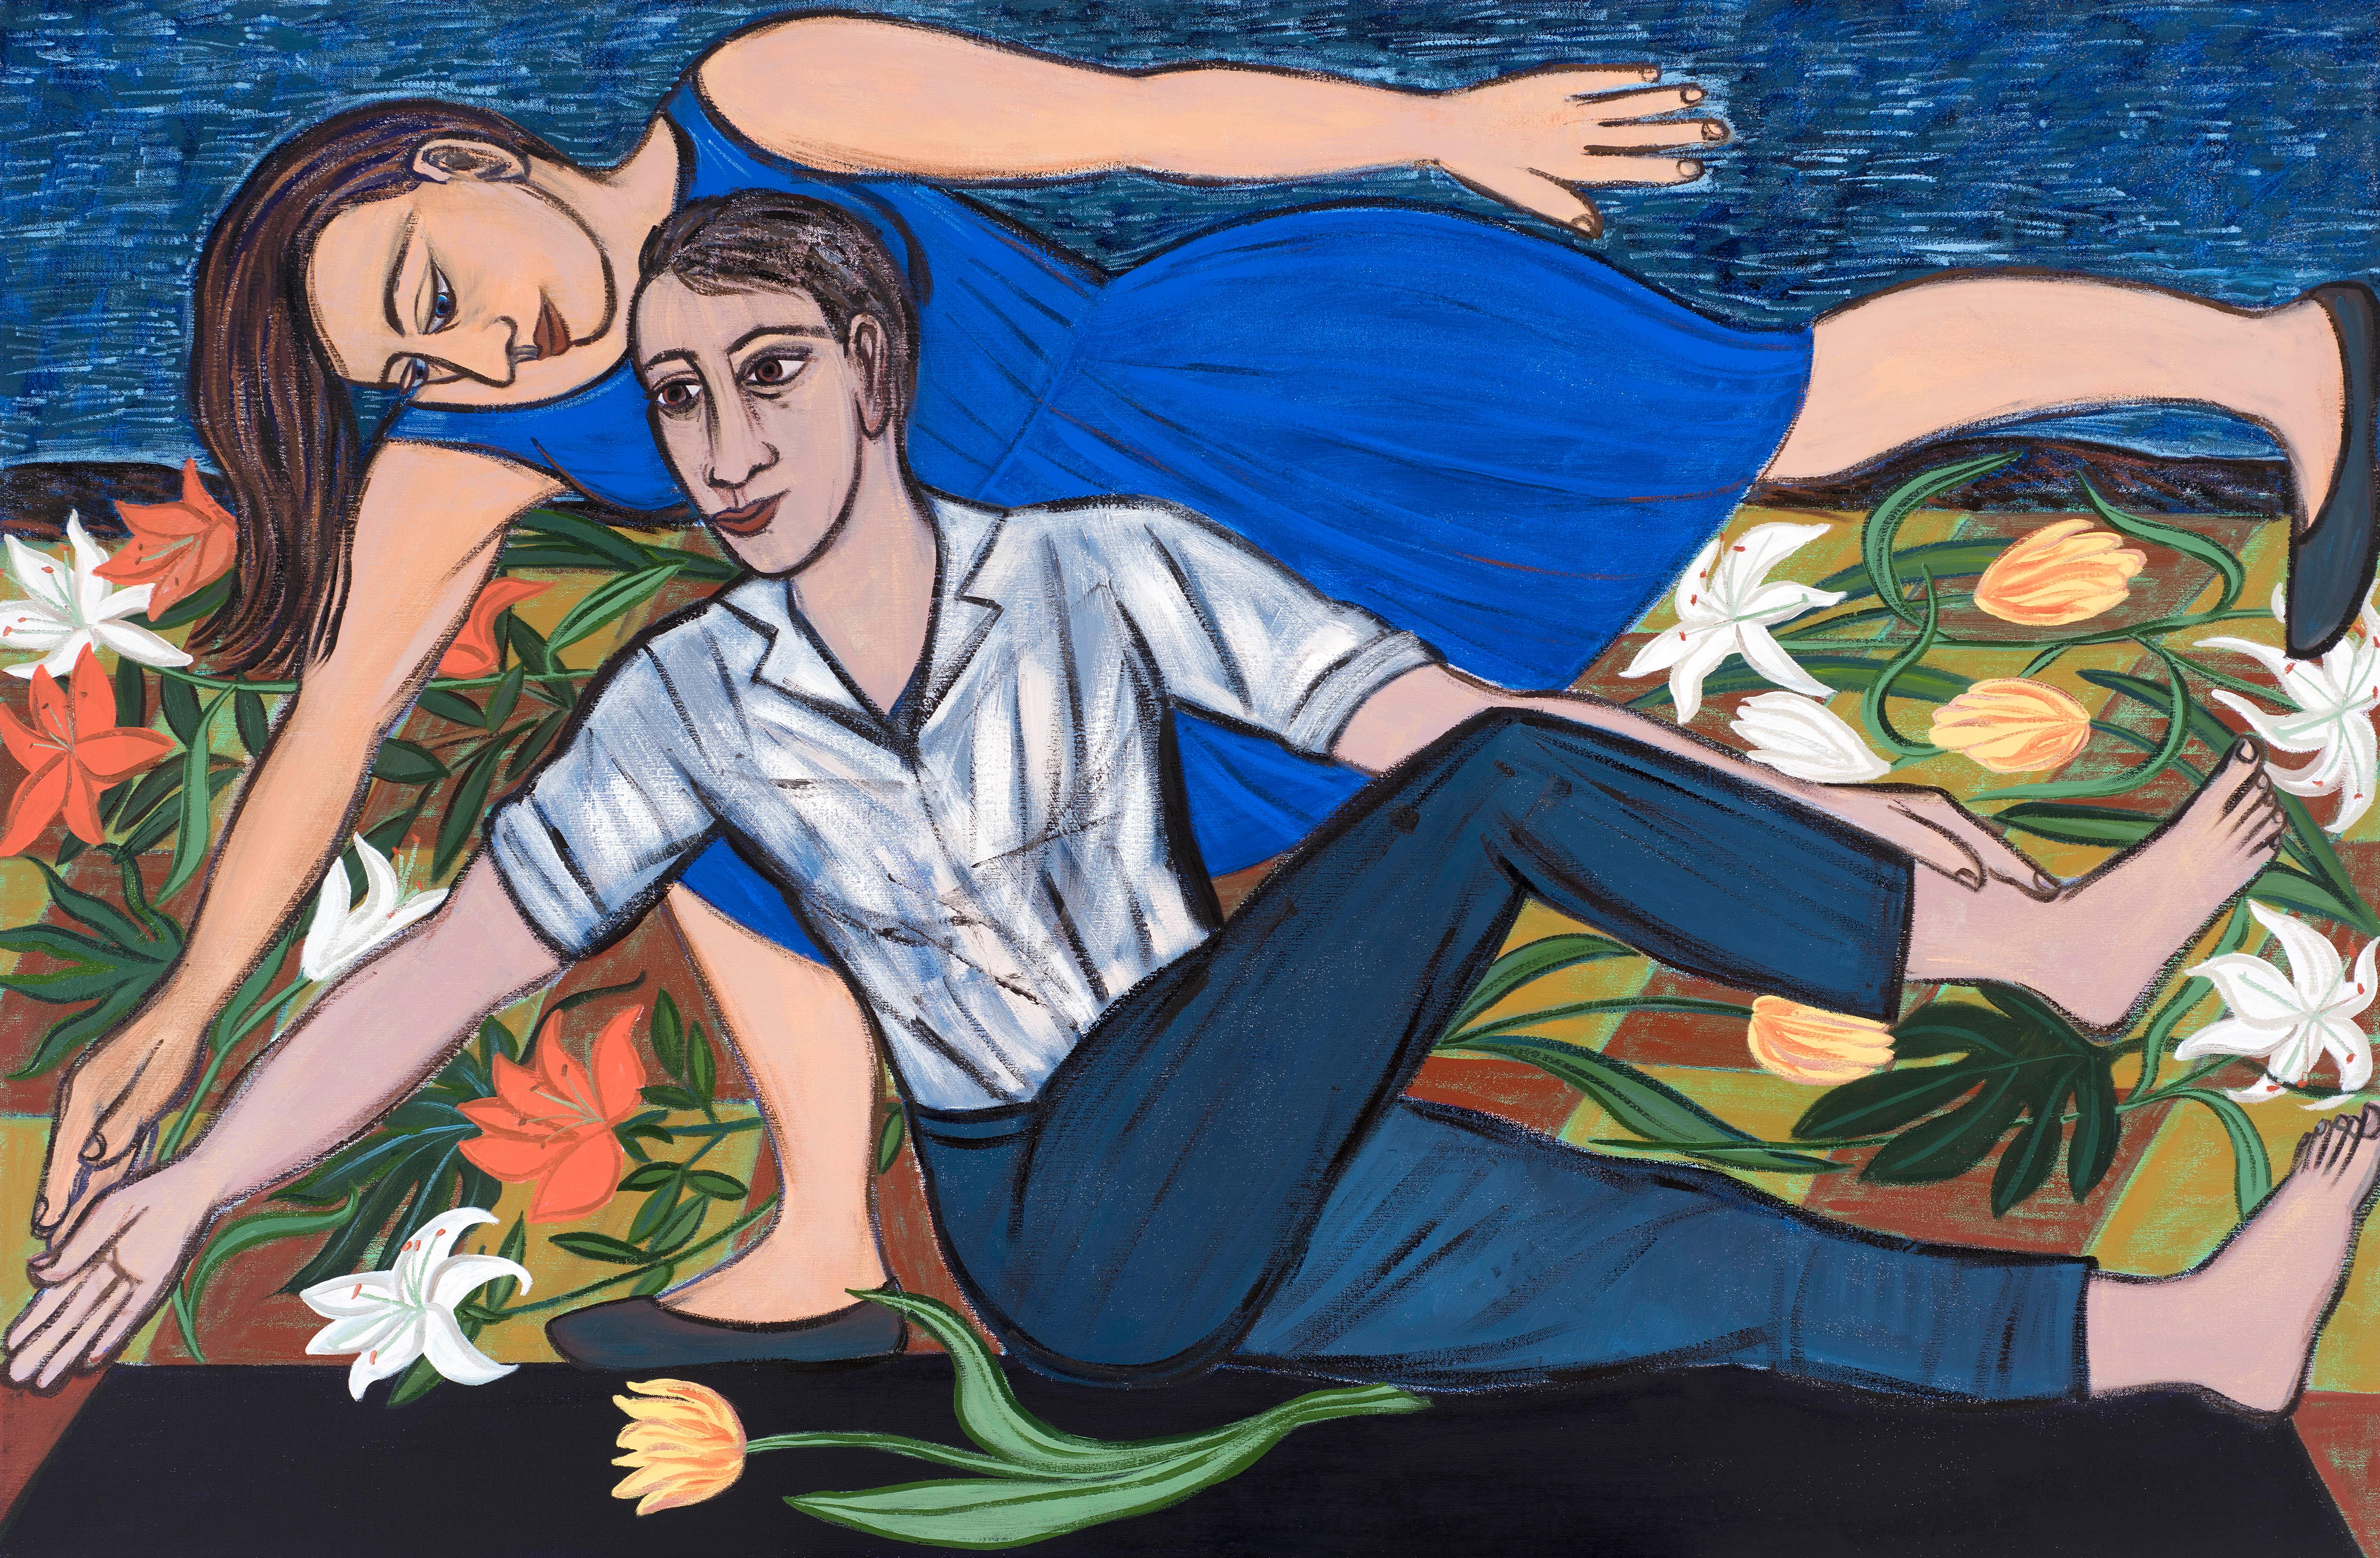 Blue Duet, 2016 - Eileen Cooper (Figurative Painting)

Throughout her career, Eileen Cooper (born 1953) has made figurative paintings that encompass themes of fertility, sexuality, motherhood, life and death. A Keeper of the Royal Academy for almost